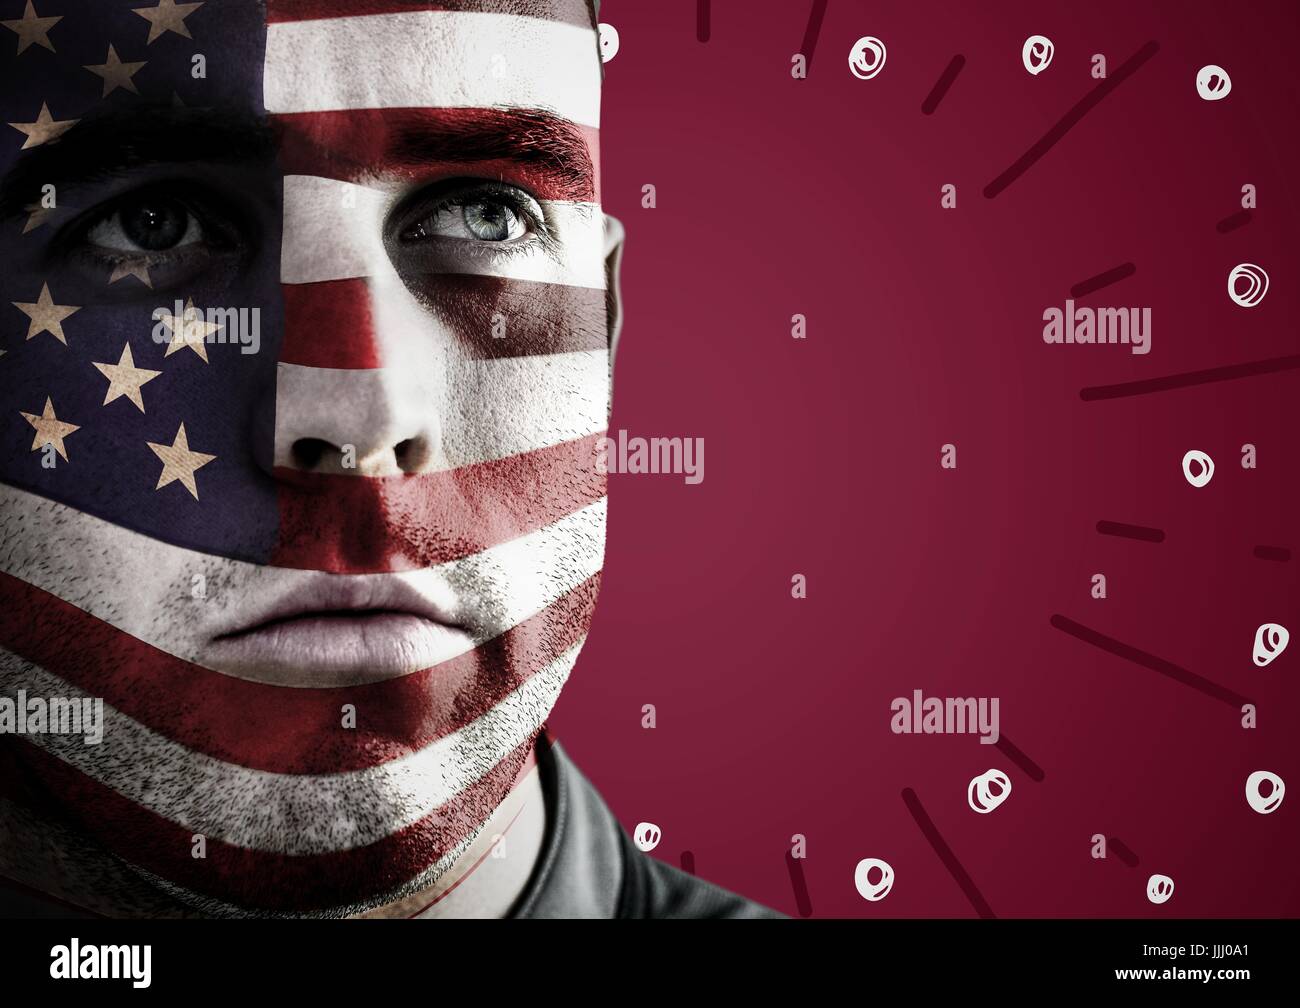 Portraiture of man with american flag face paint against maroon background with fireworks doodles Stock Photo